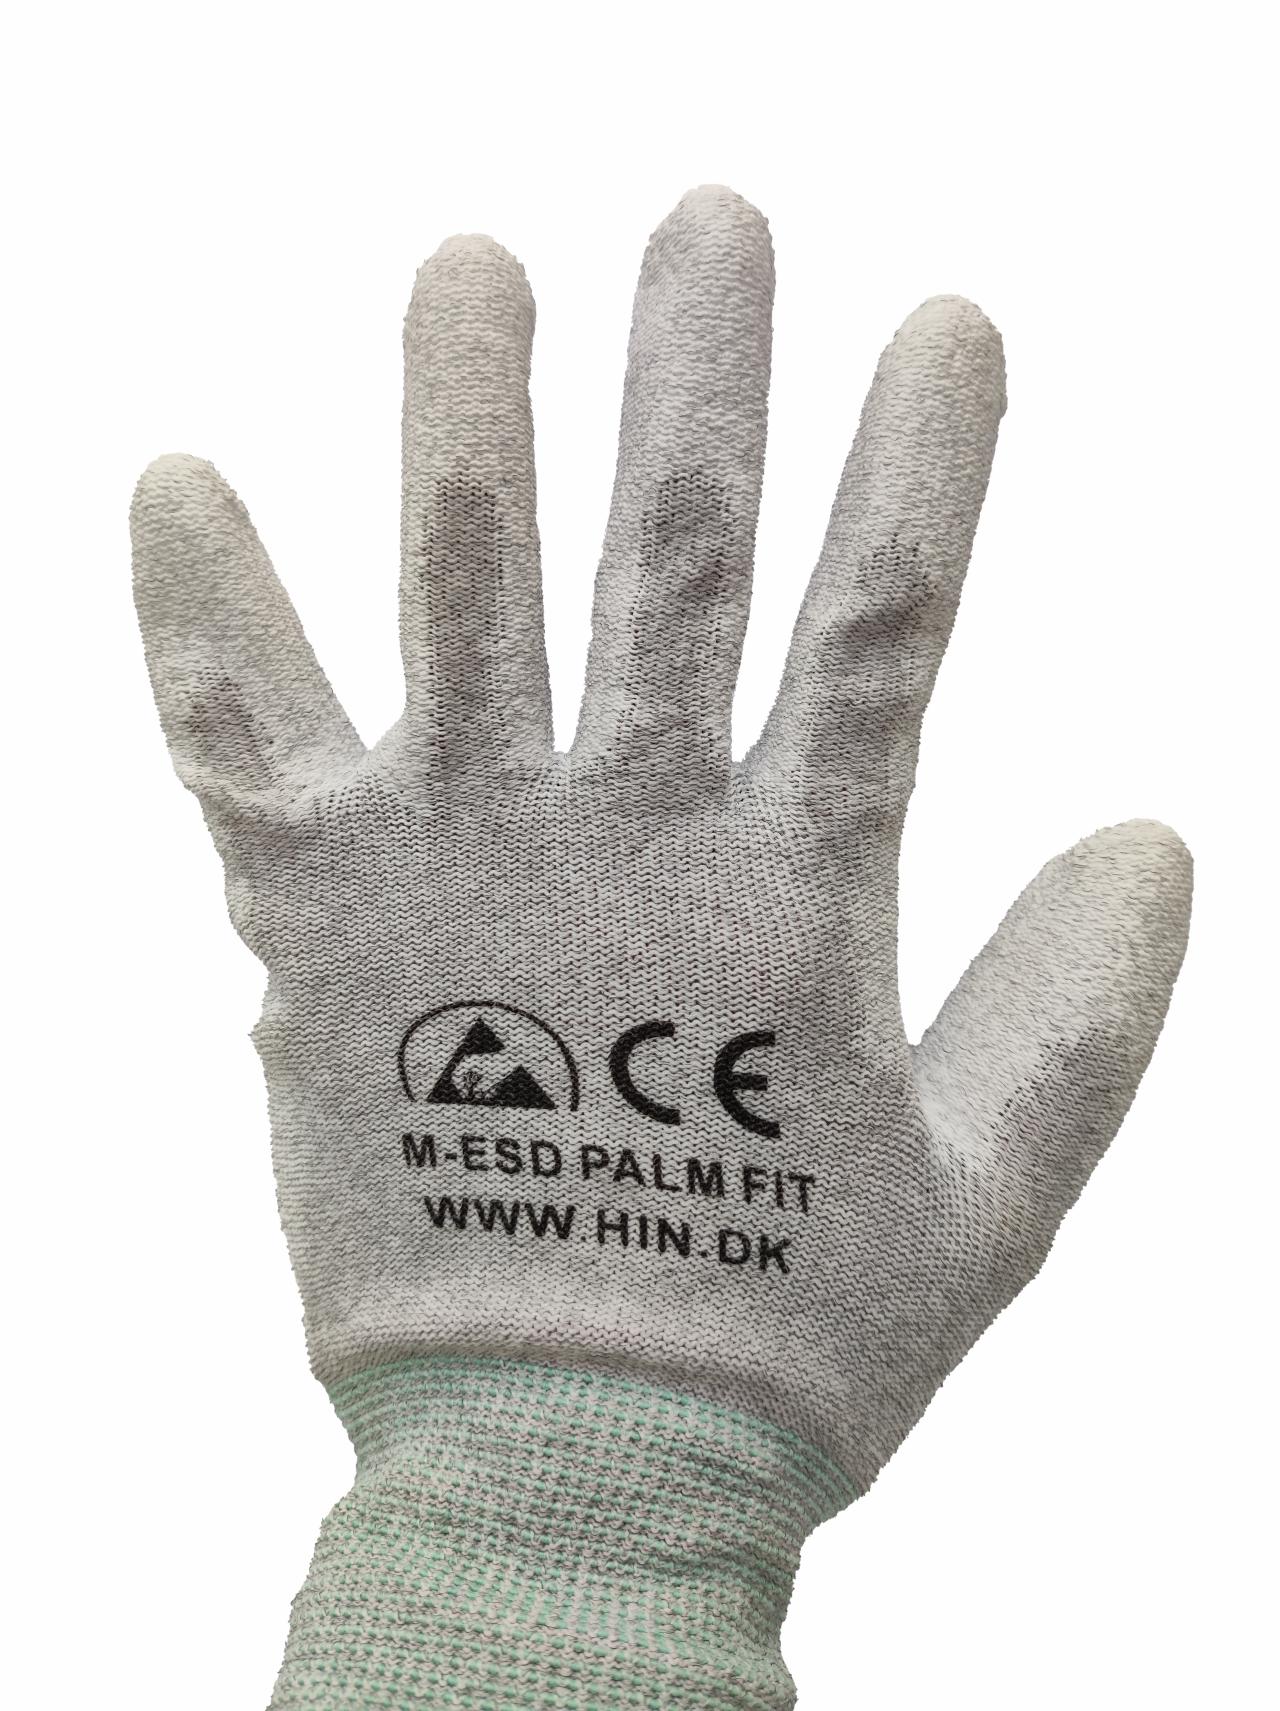 Gloves, ESD knit, Gray, Palm Fit Size: Medium, pastel green cuff